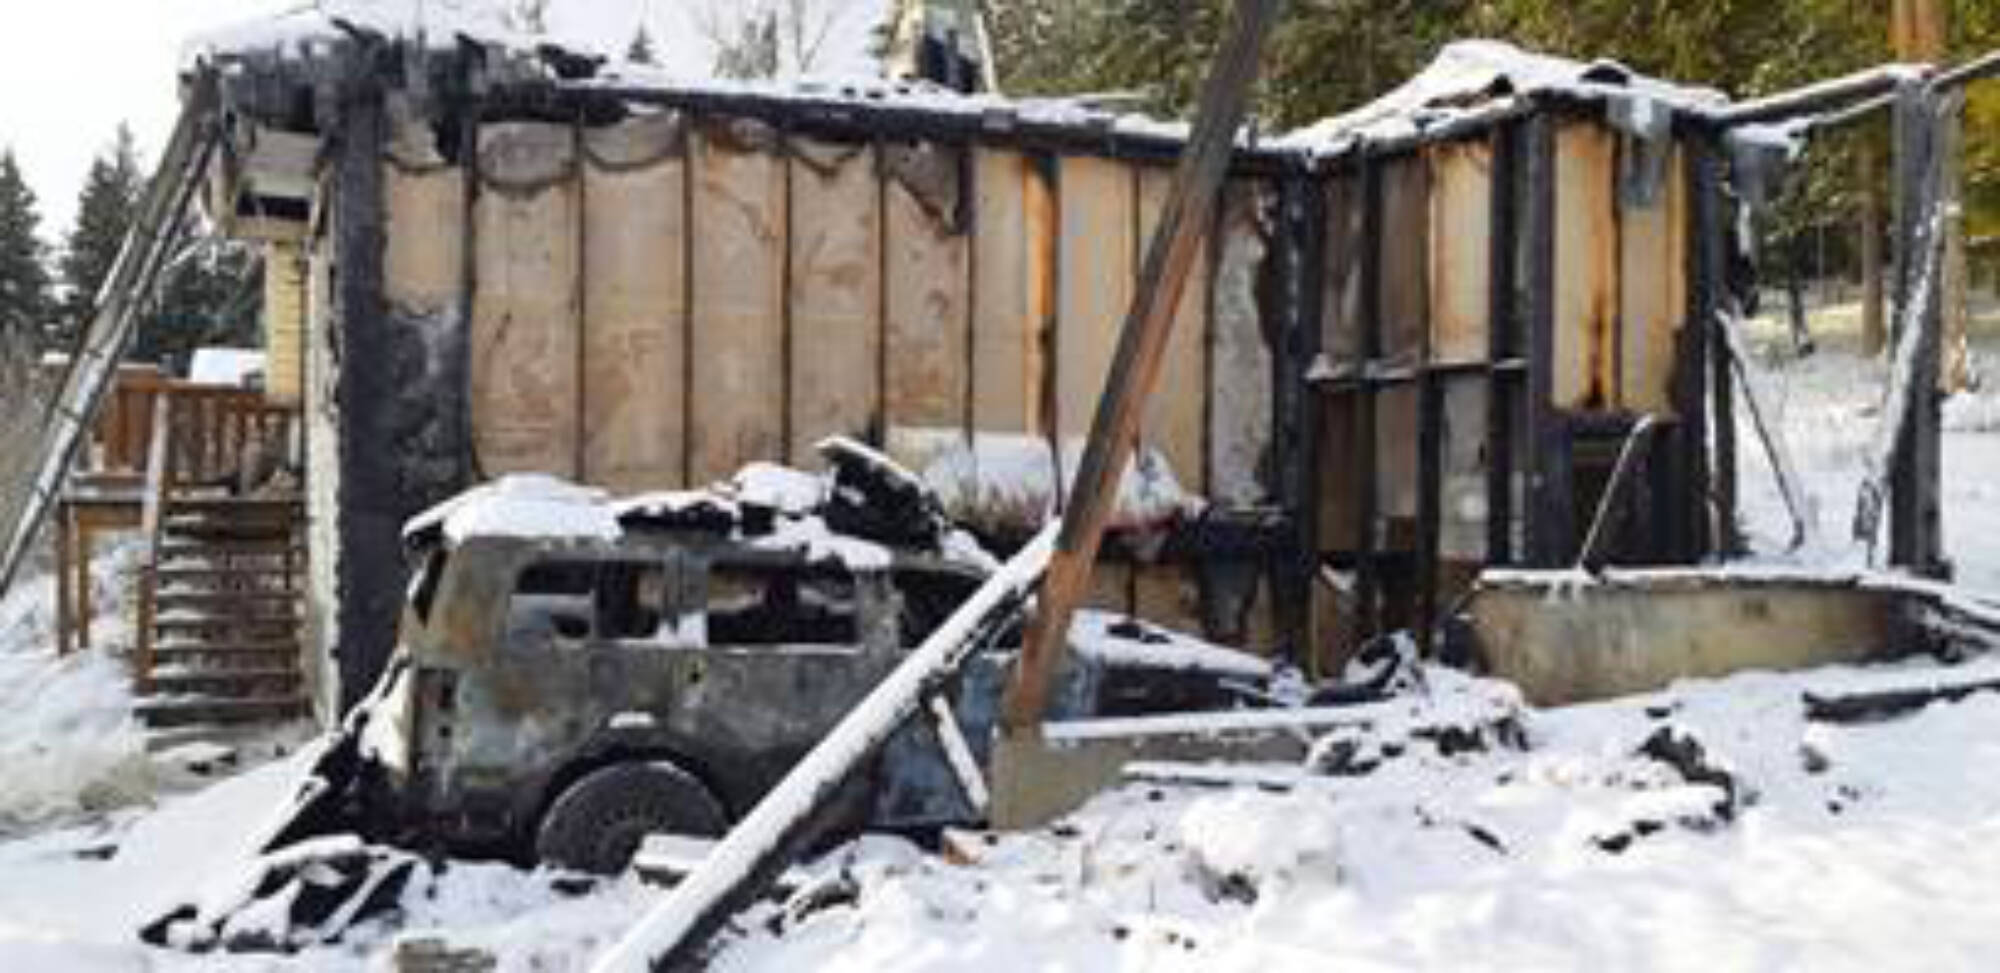 Bonnie Thomas and her son Darcy Andrew escaped from their burning home west of Salmon Arm on Switzmalph land about 3 a.m. Saturday, Jan. 8 after someone was seen running away from the house. (Contributed)